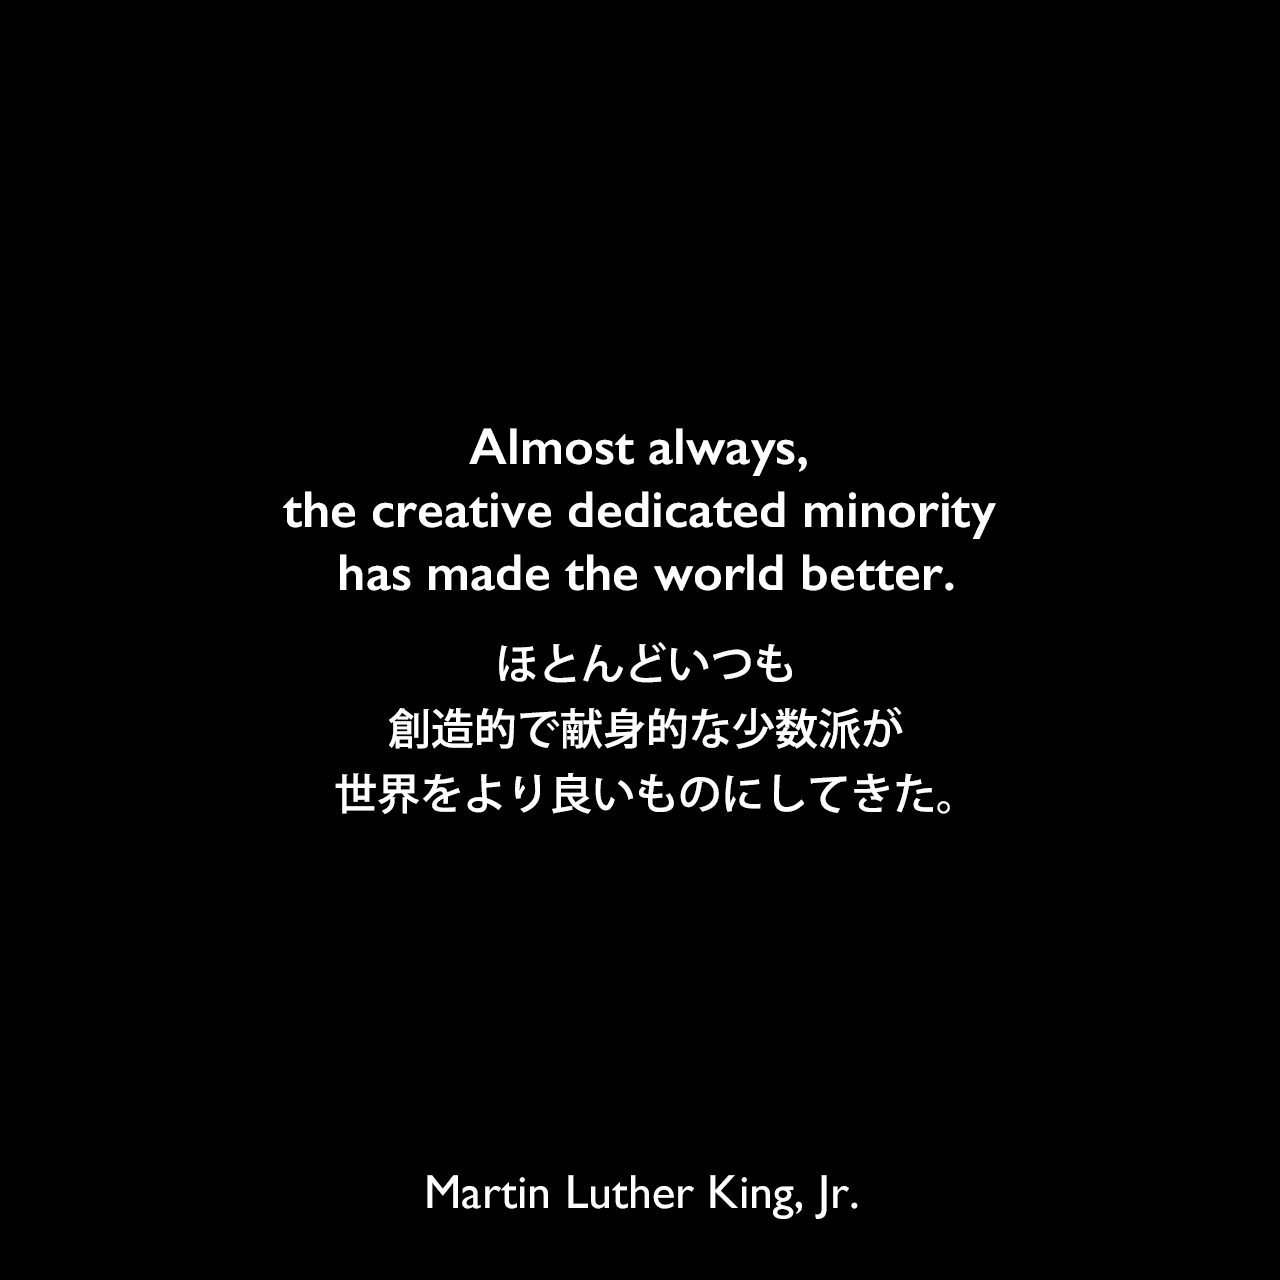 Almost always, the creative dedicated minority has made the world better.ほとんどいつも、創造的で献身的な少数派が世界をより良いものにしてきた。Martin Luther King, Jr.